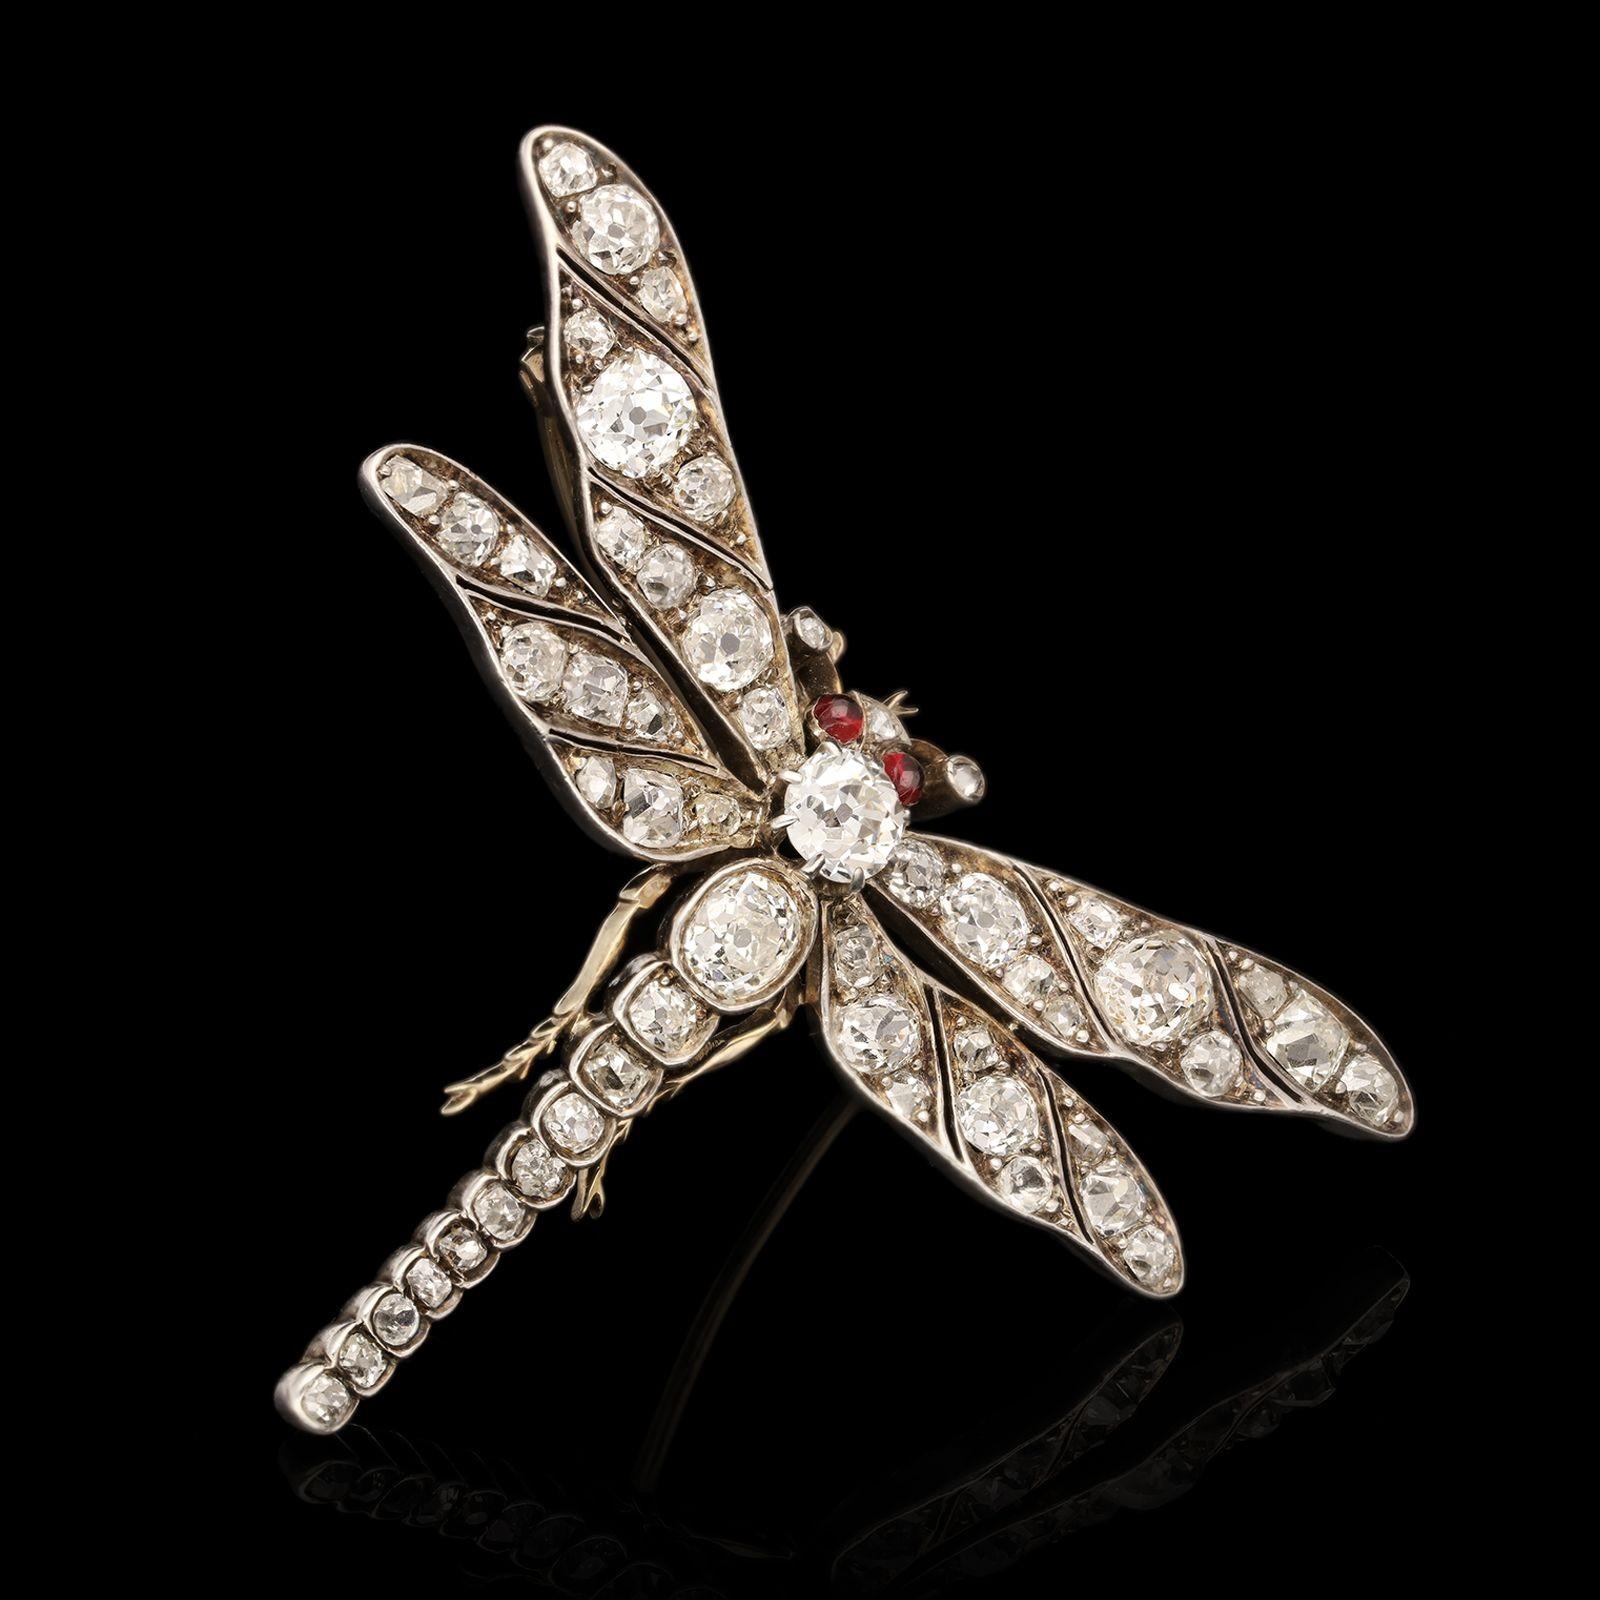 A beautiful Victorian diamond dragonfly brooch, c.1870s, the openwork design realistically modelled in silver and gold depicting a dragonfly in flight with wings outspread, the tapering body and wings set throughout with old cut diamonds and the